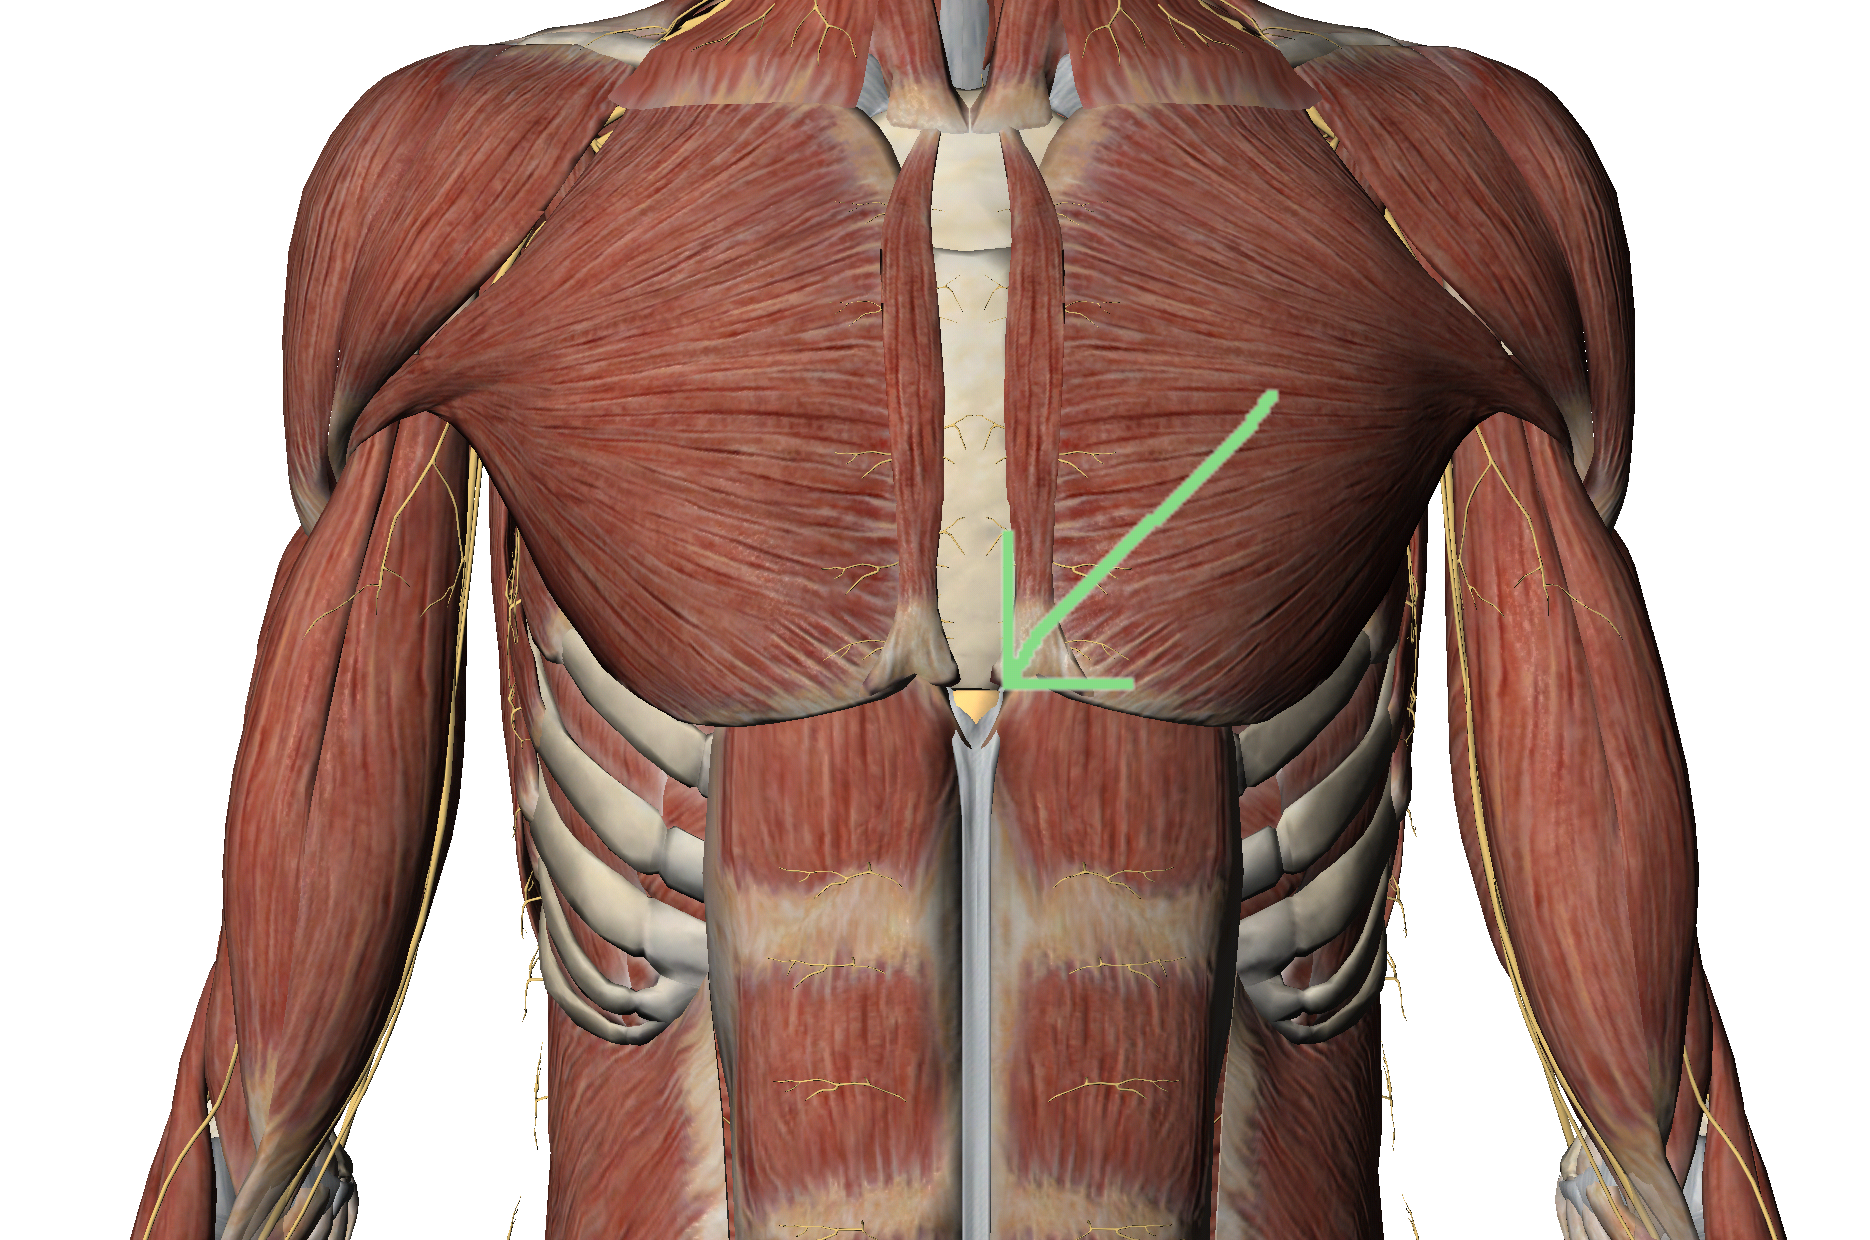 Xiphoid Process indicated by the arrow